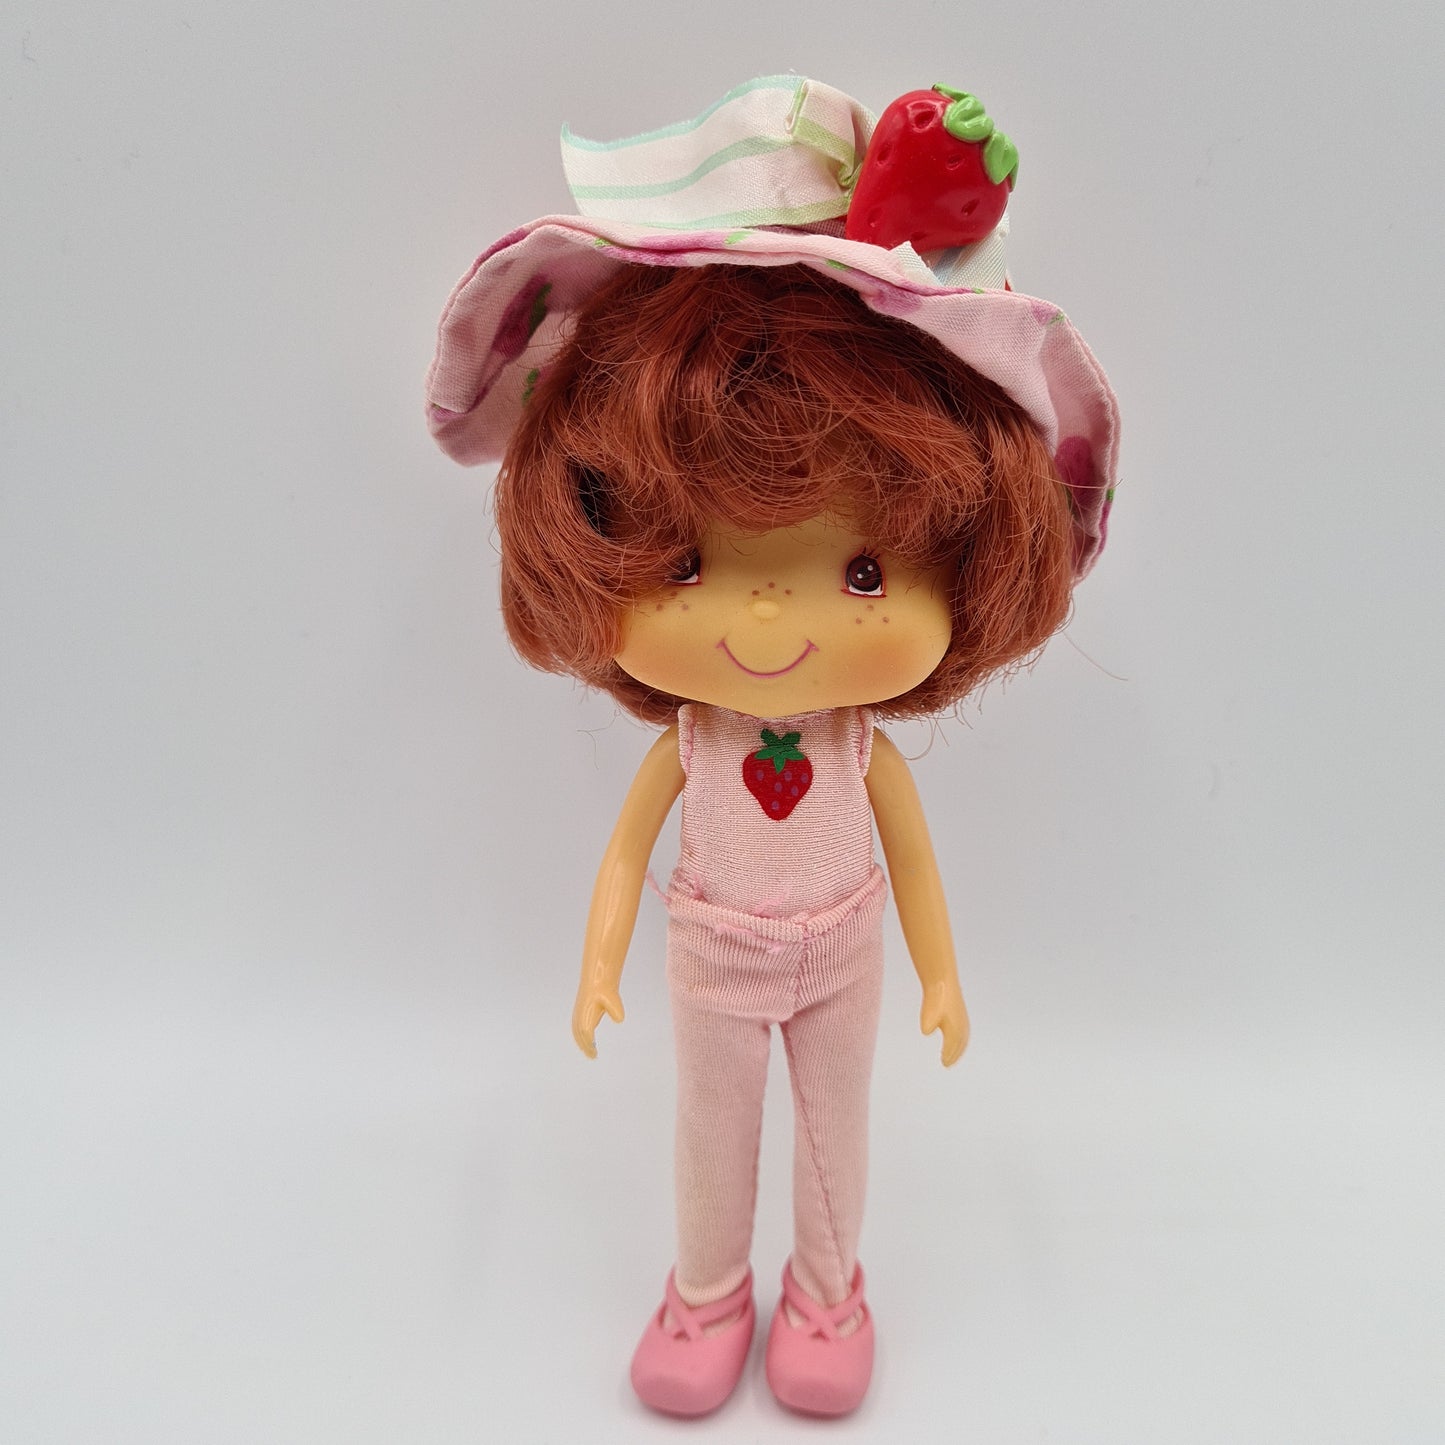 Strawberry Shortcake Kenner 80s Doll Original outfit W13